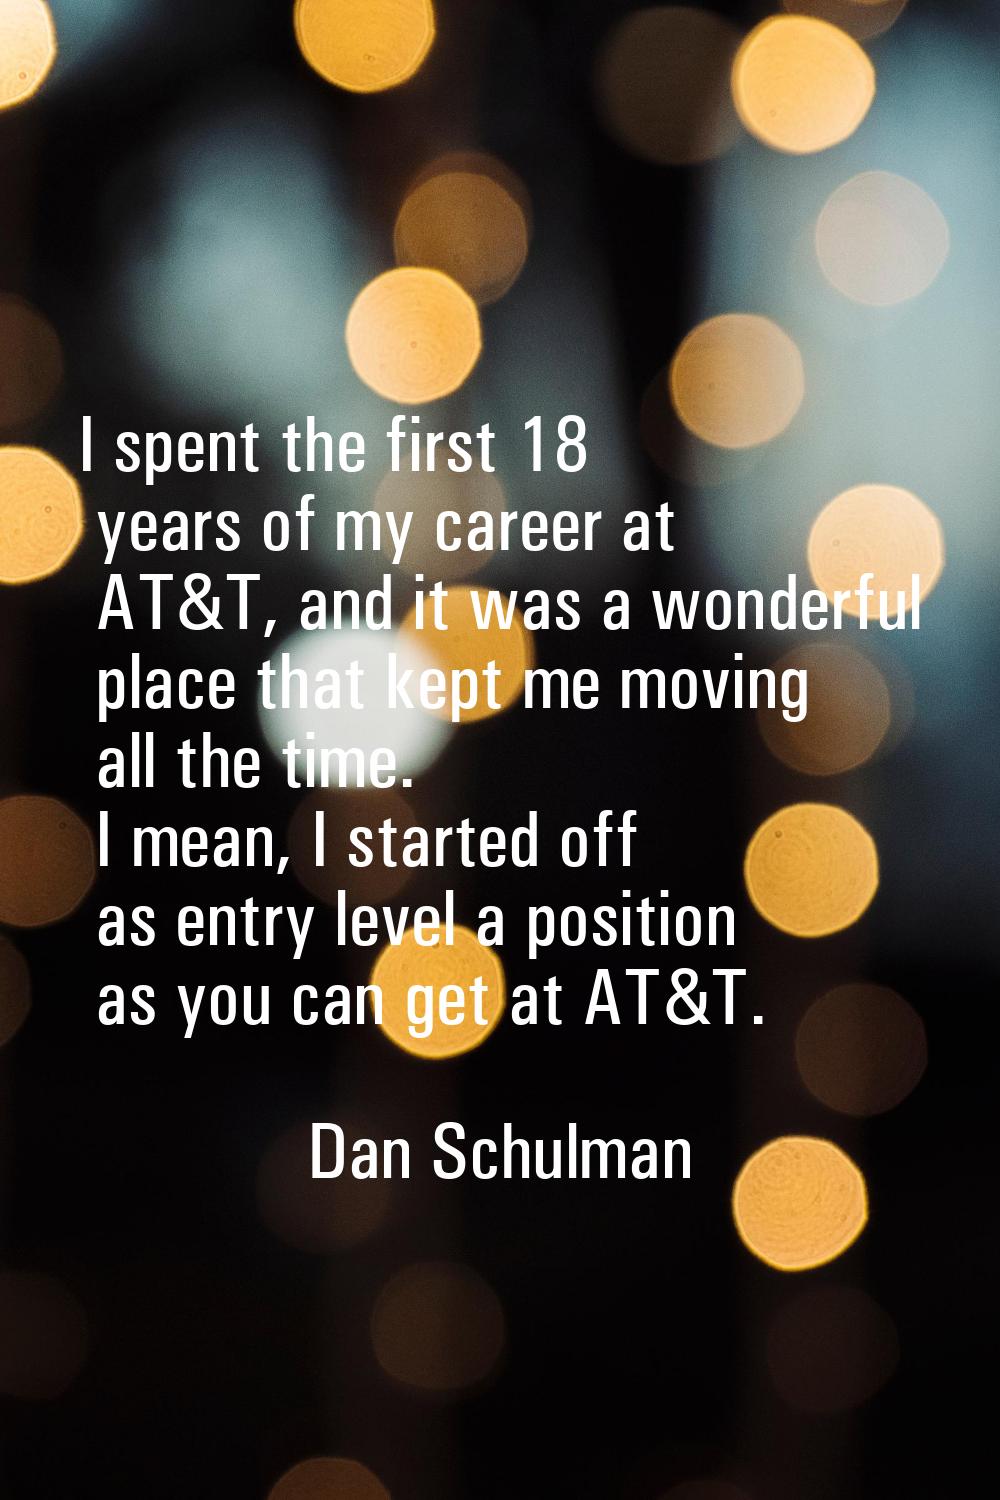 I spent the first 18 years of my career at AT&T, and it was a wonderful place that kept me moving a